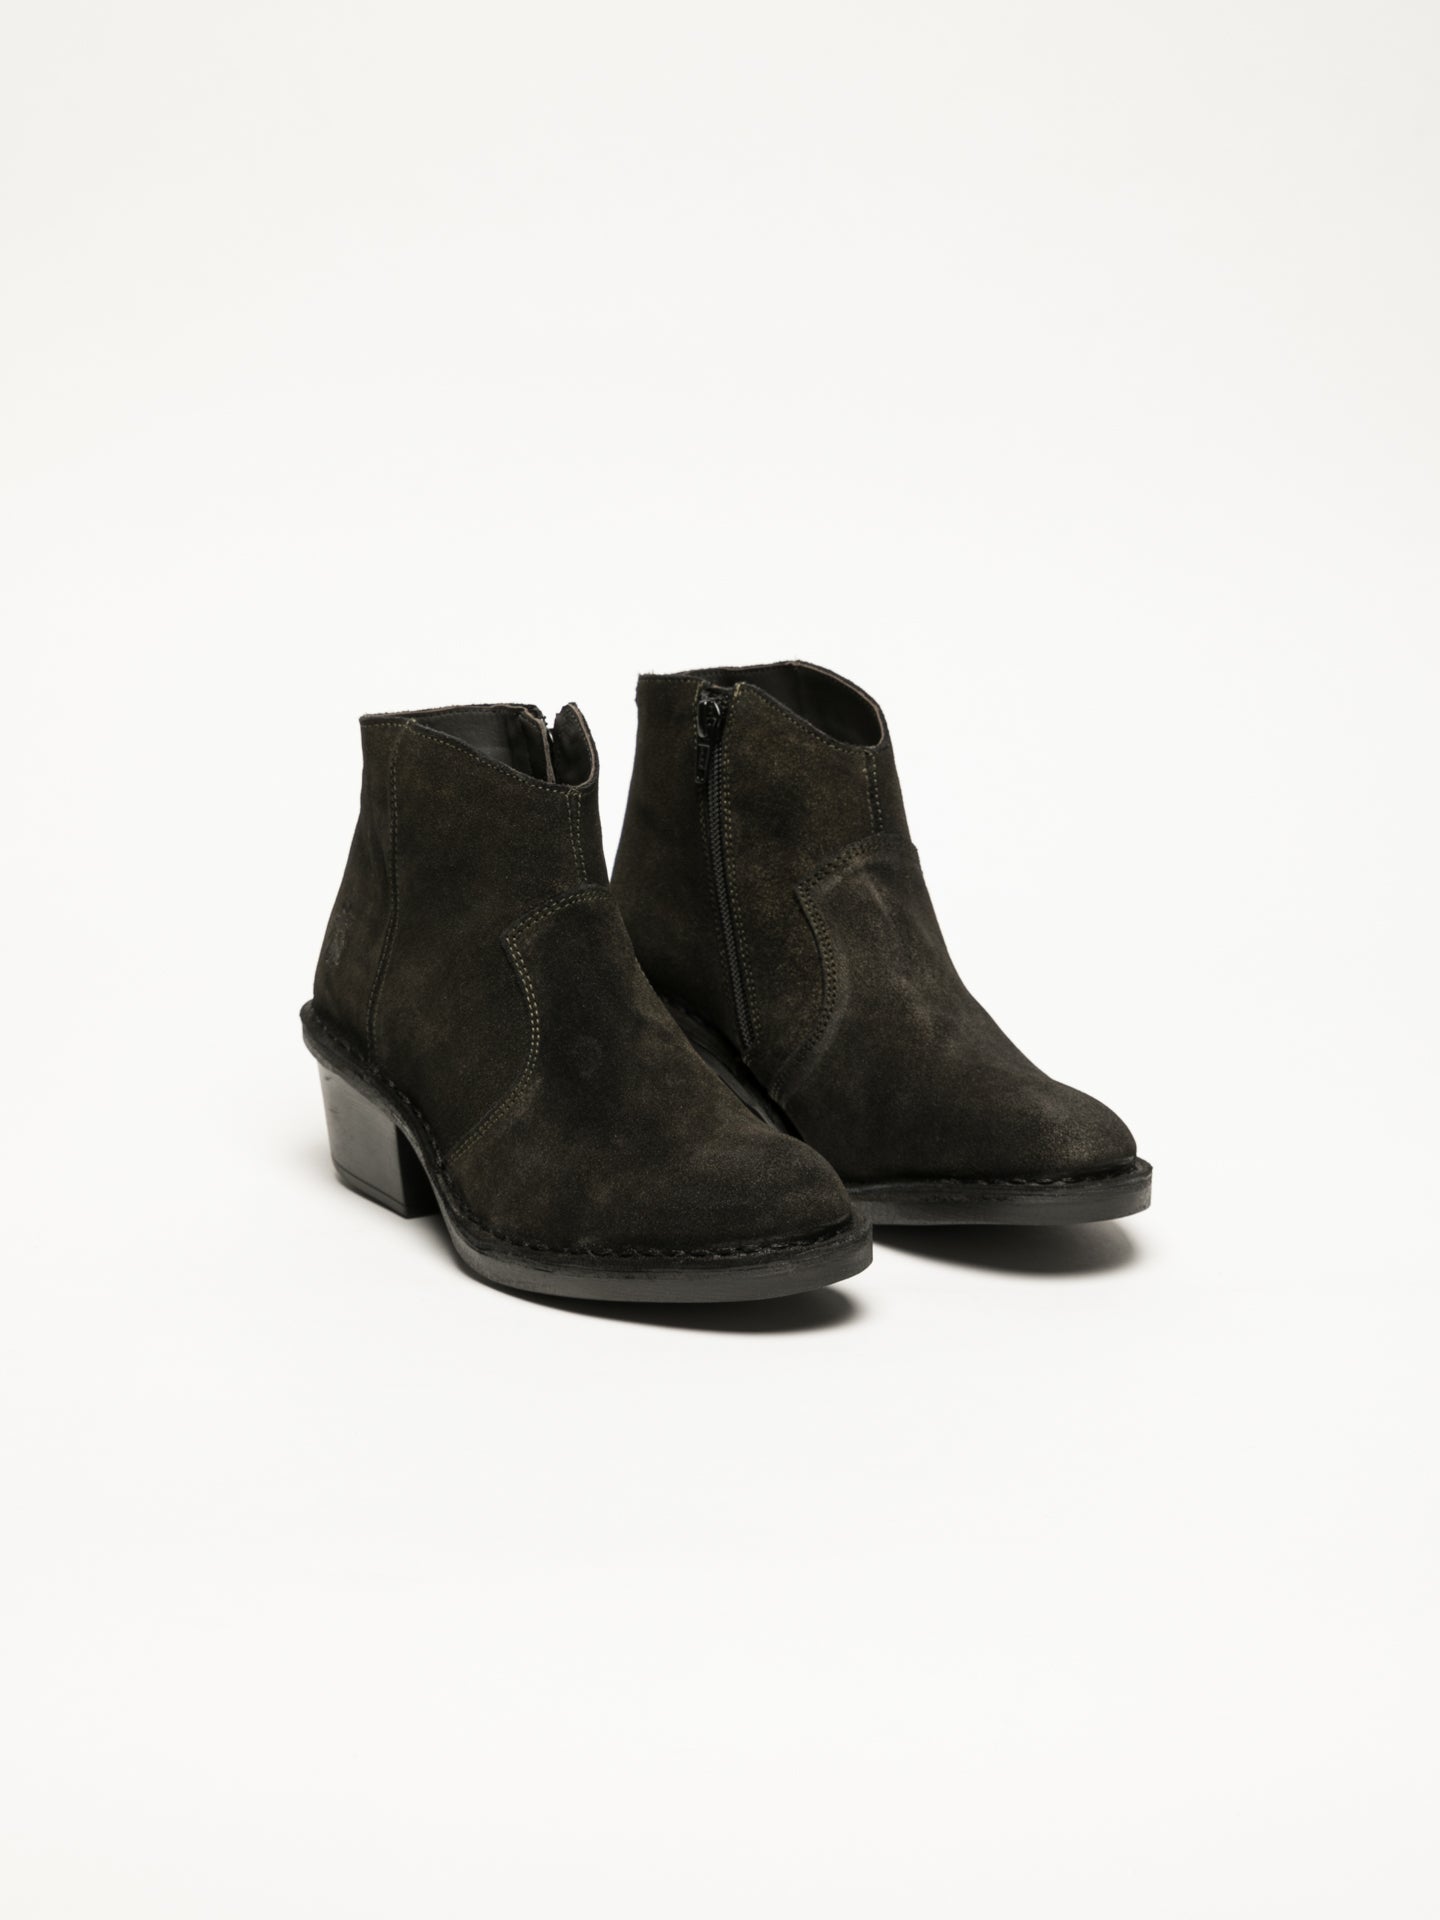 Fly London Khaki Zip Up Ankle Boots